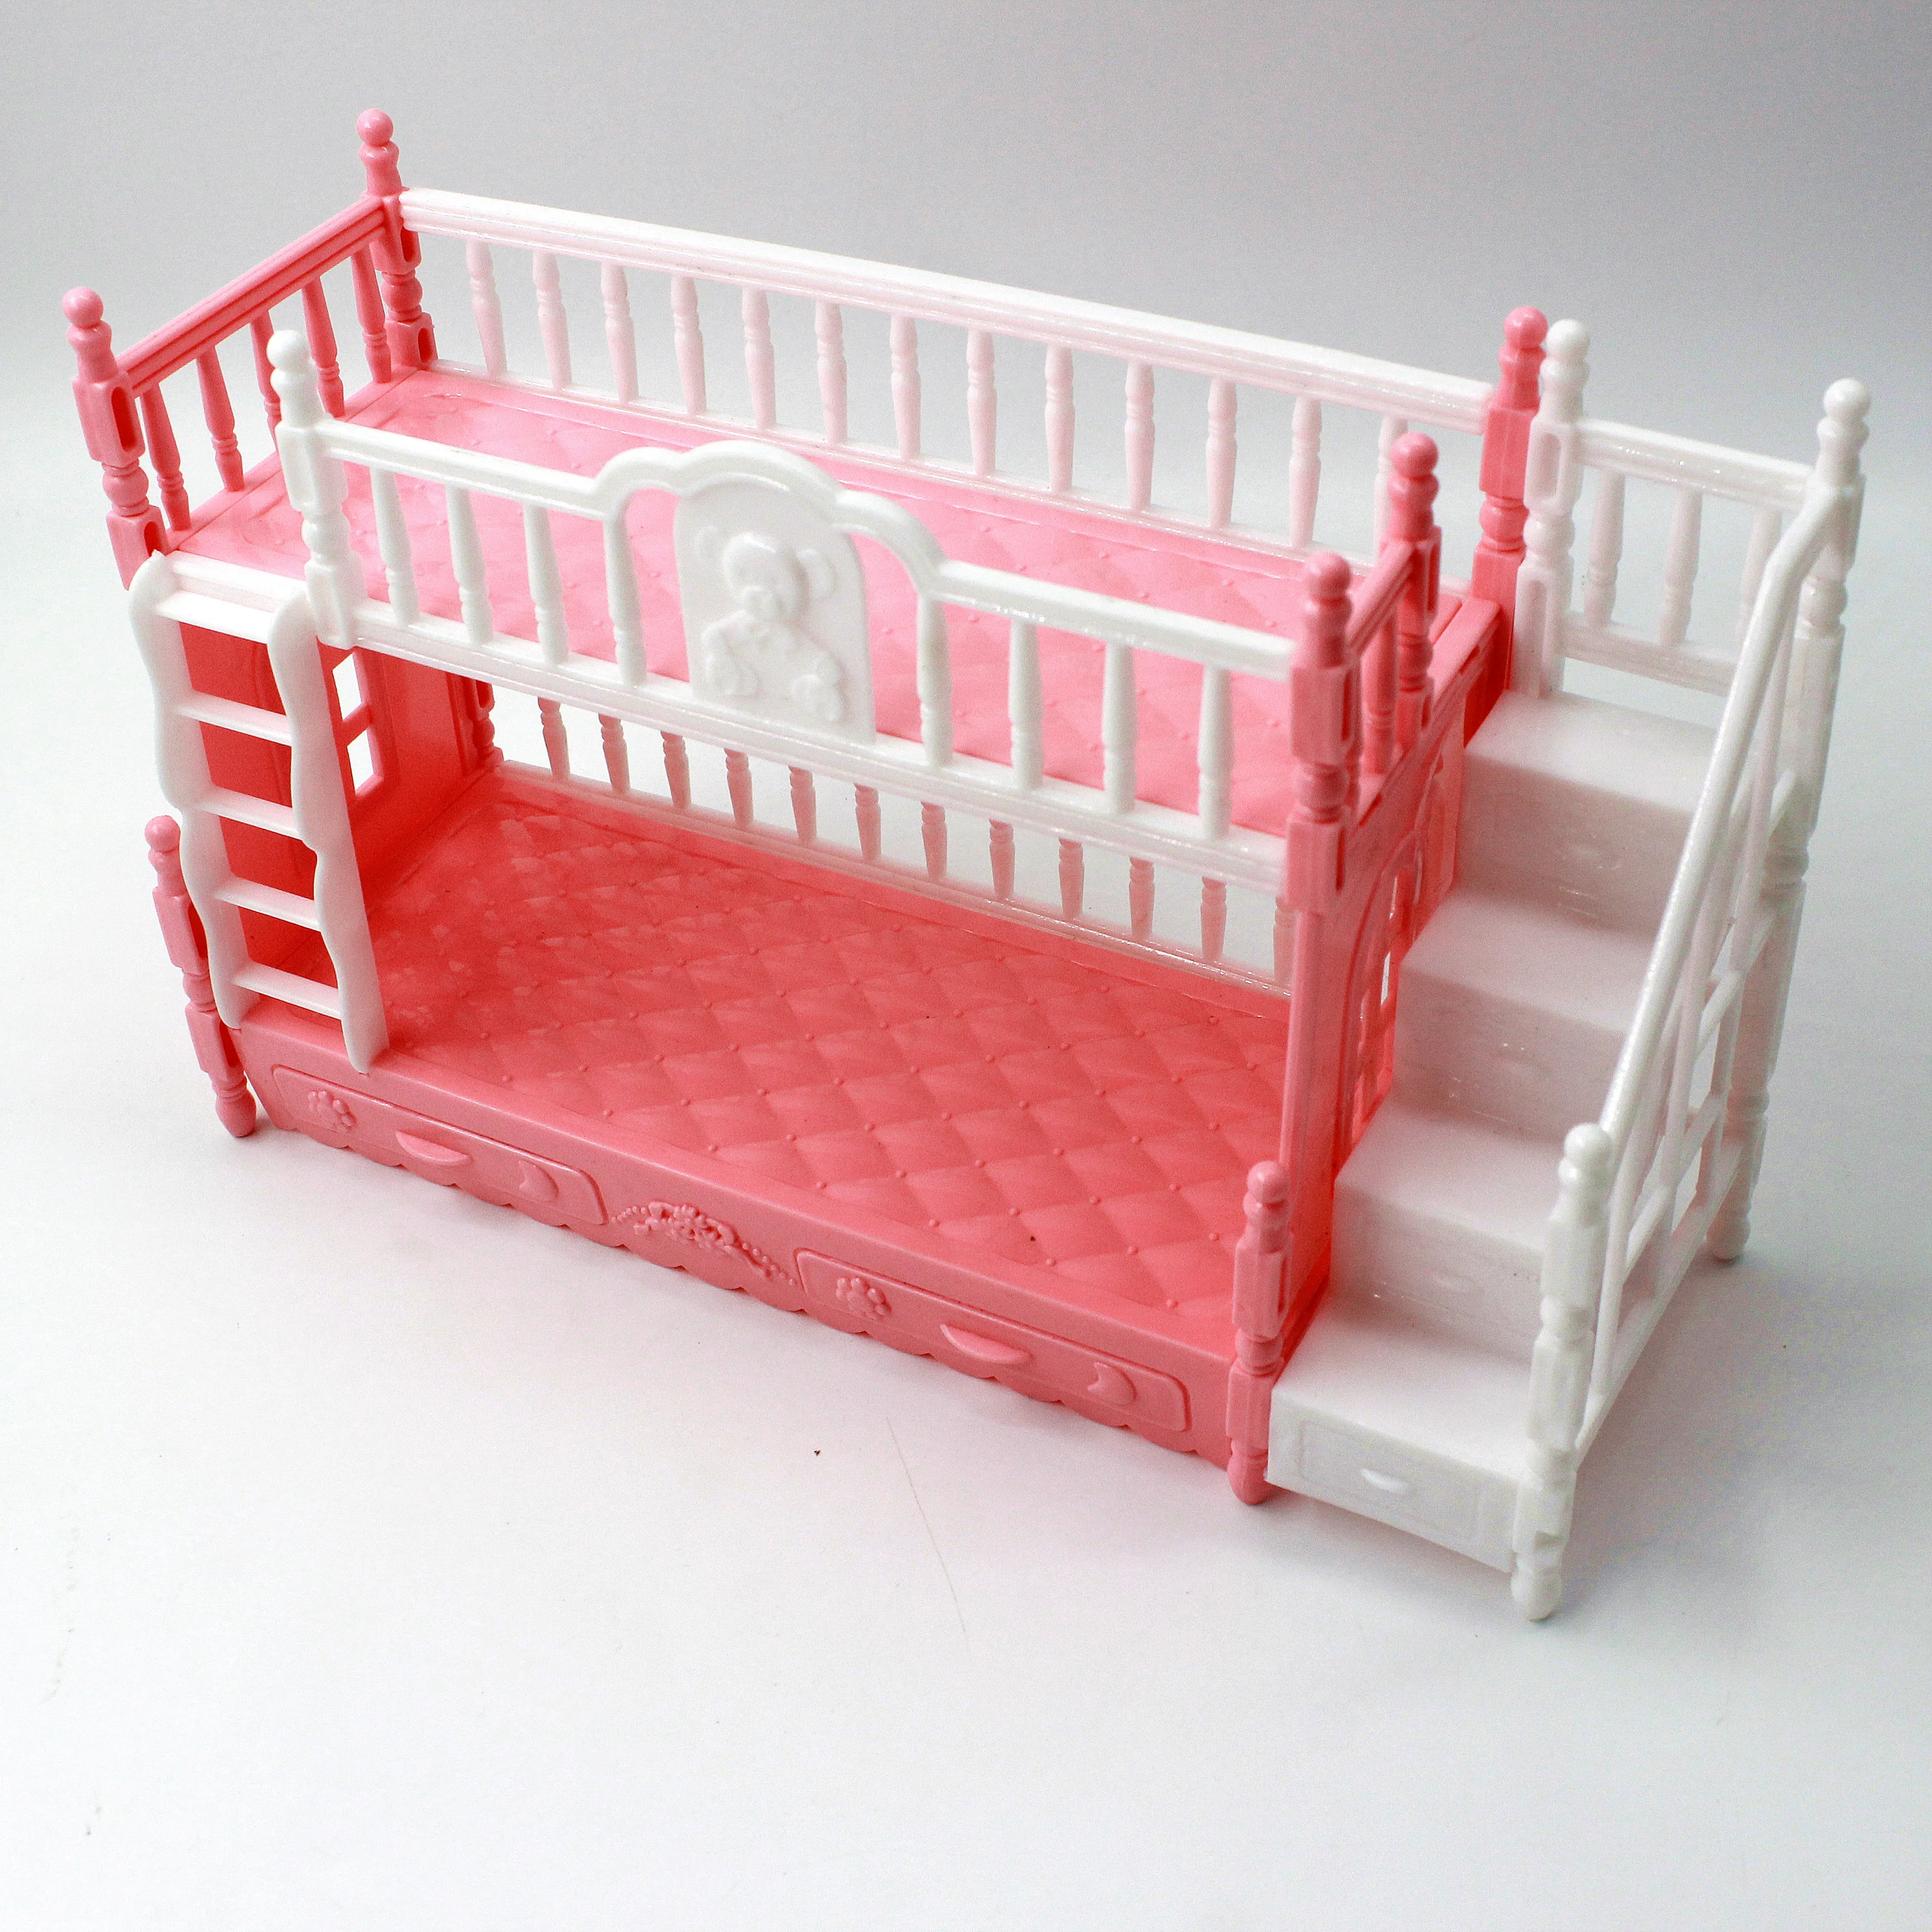 BJD Doll Children Play House For Barbie Doll Accessories Simulation European Furniture Princess Double Bed With Stairs Toys images - 6